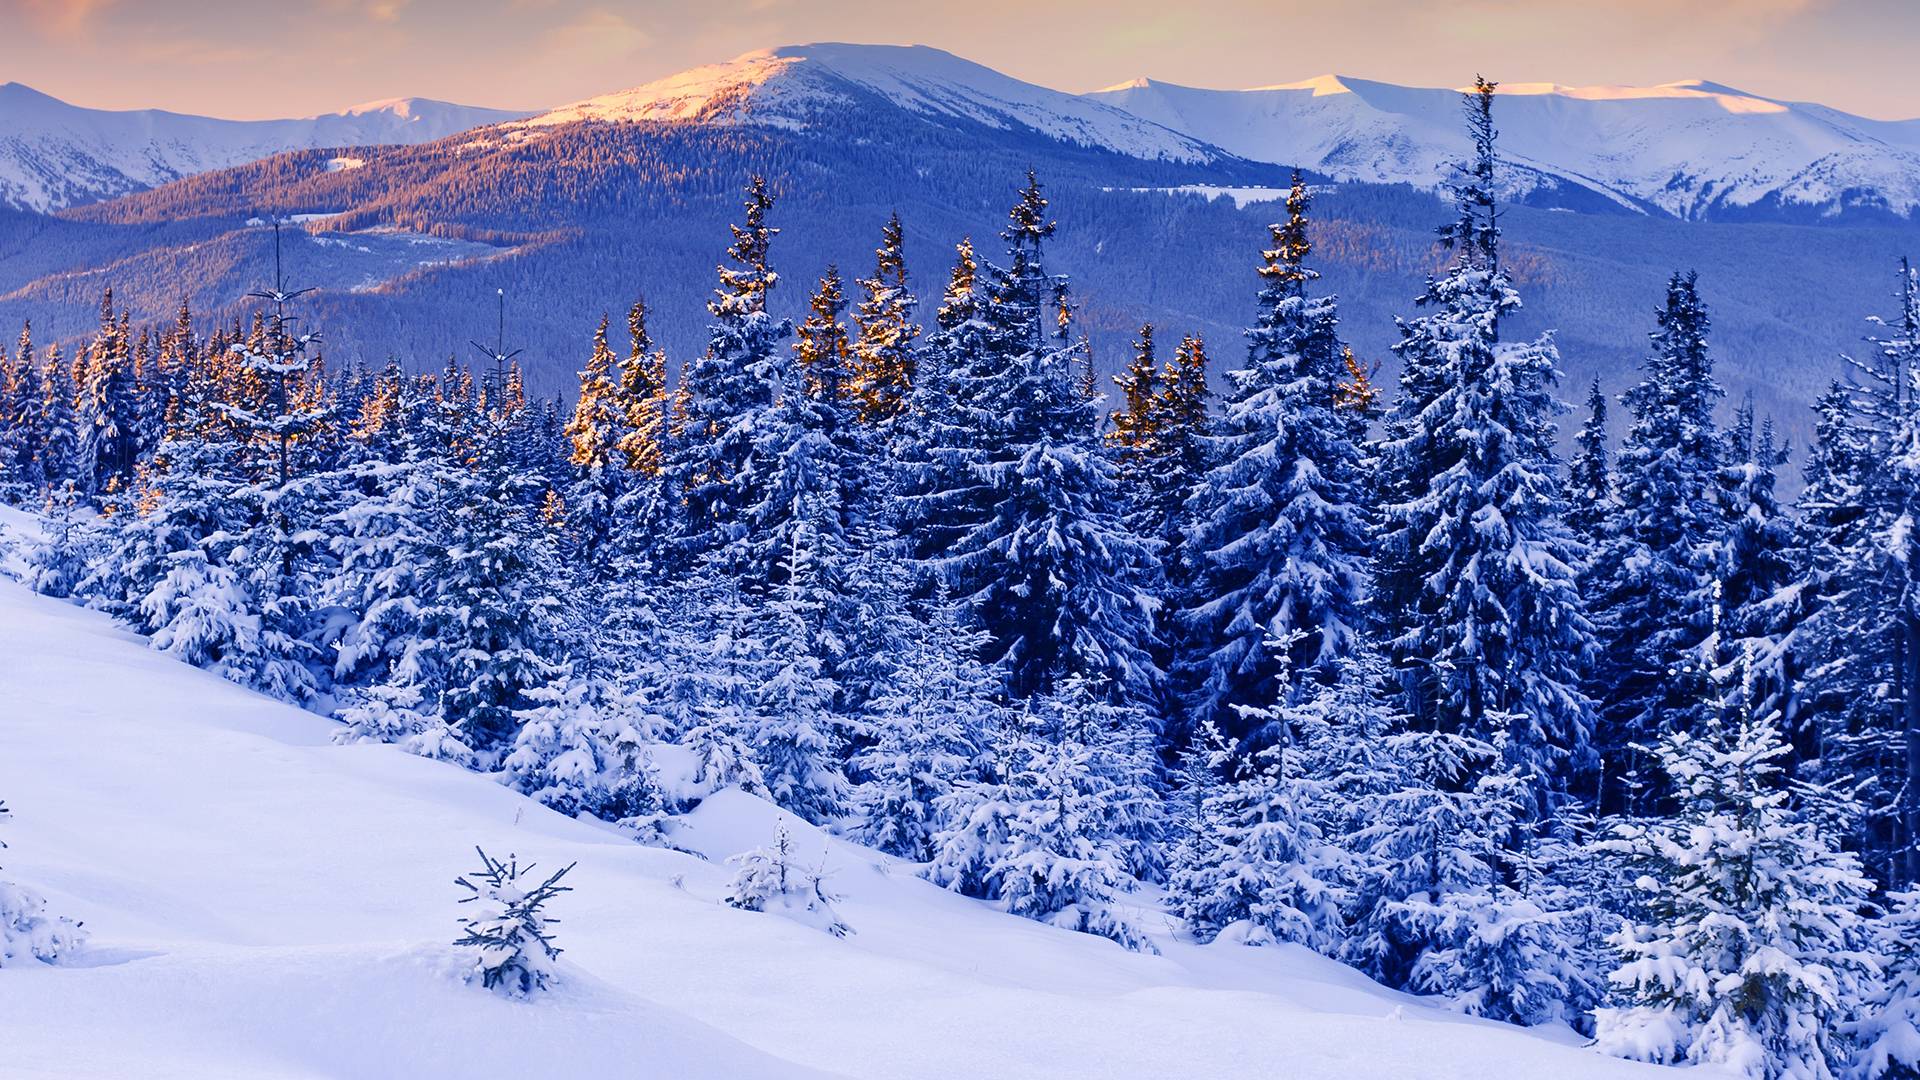 Nature landscapes trees forests mountains scenic winter snow